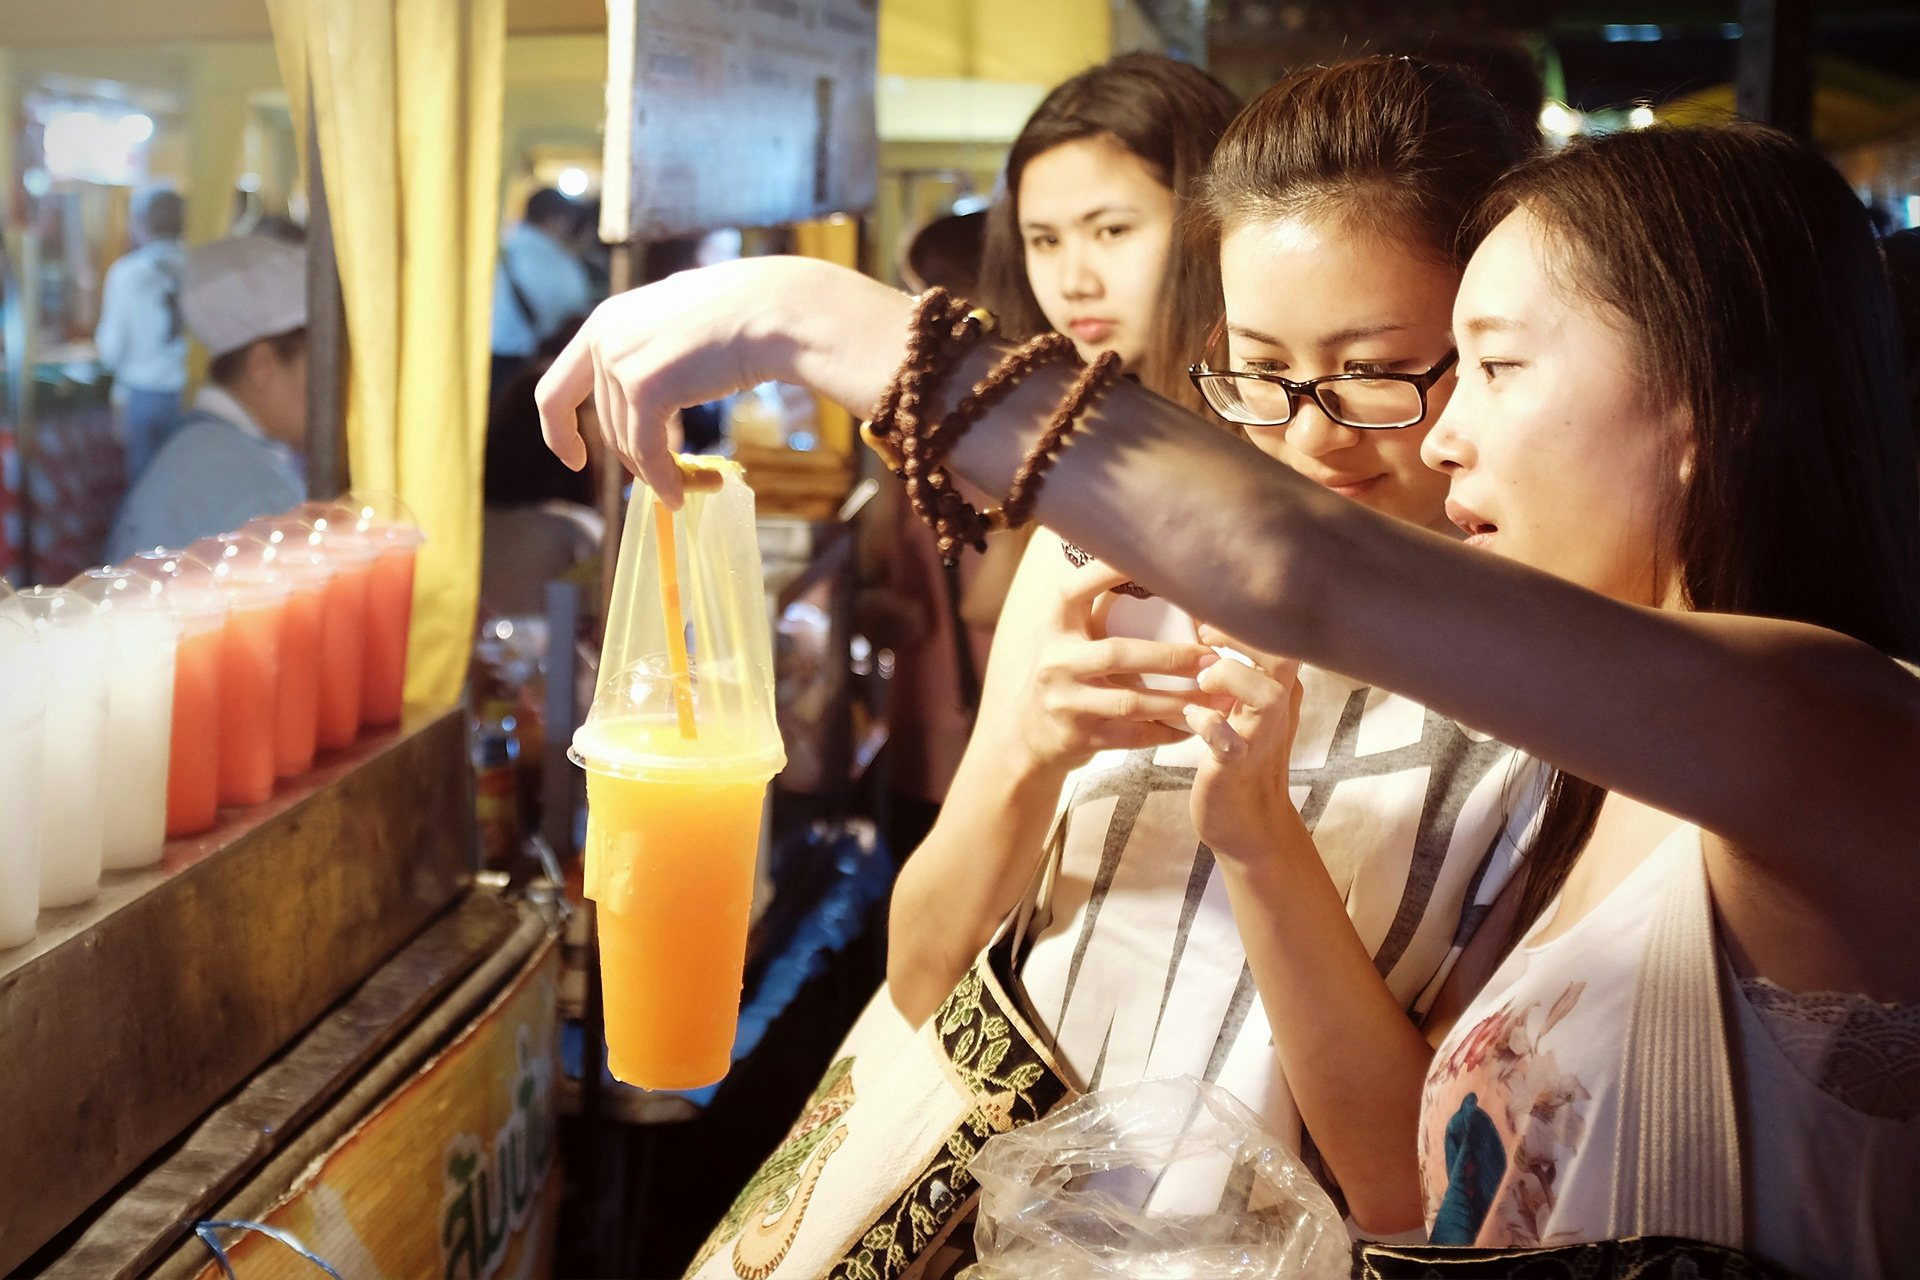 Chinese millennial travelers are increasingly attracted to Thailand partly thanks to the influence of "T-Pop fever." (<a href="https://www.flickr.com/photos/polycola/24851394755/in/photostream/">Photo by Anders Lejczak on Flickr</a>)